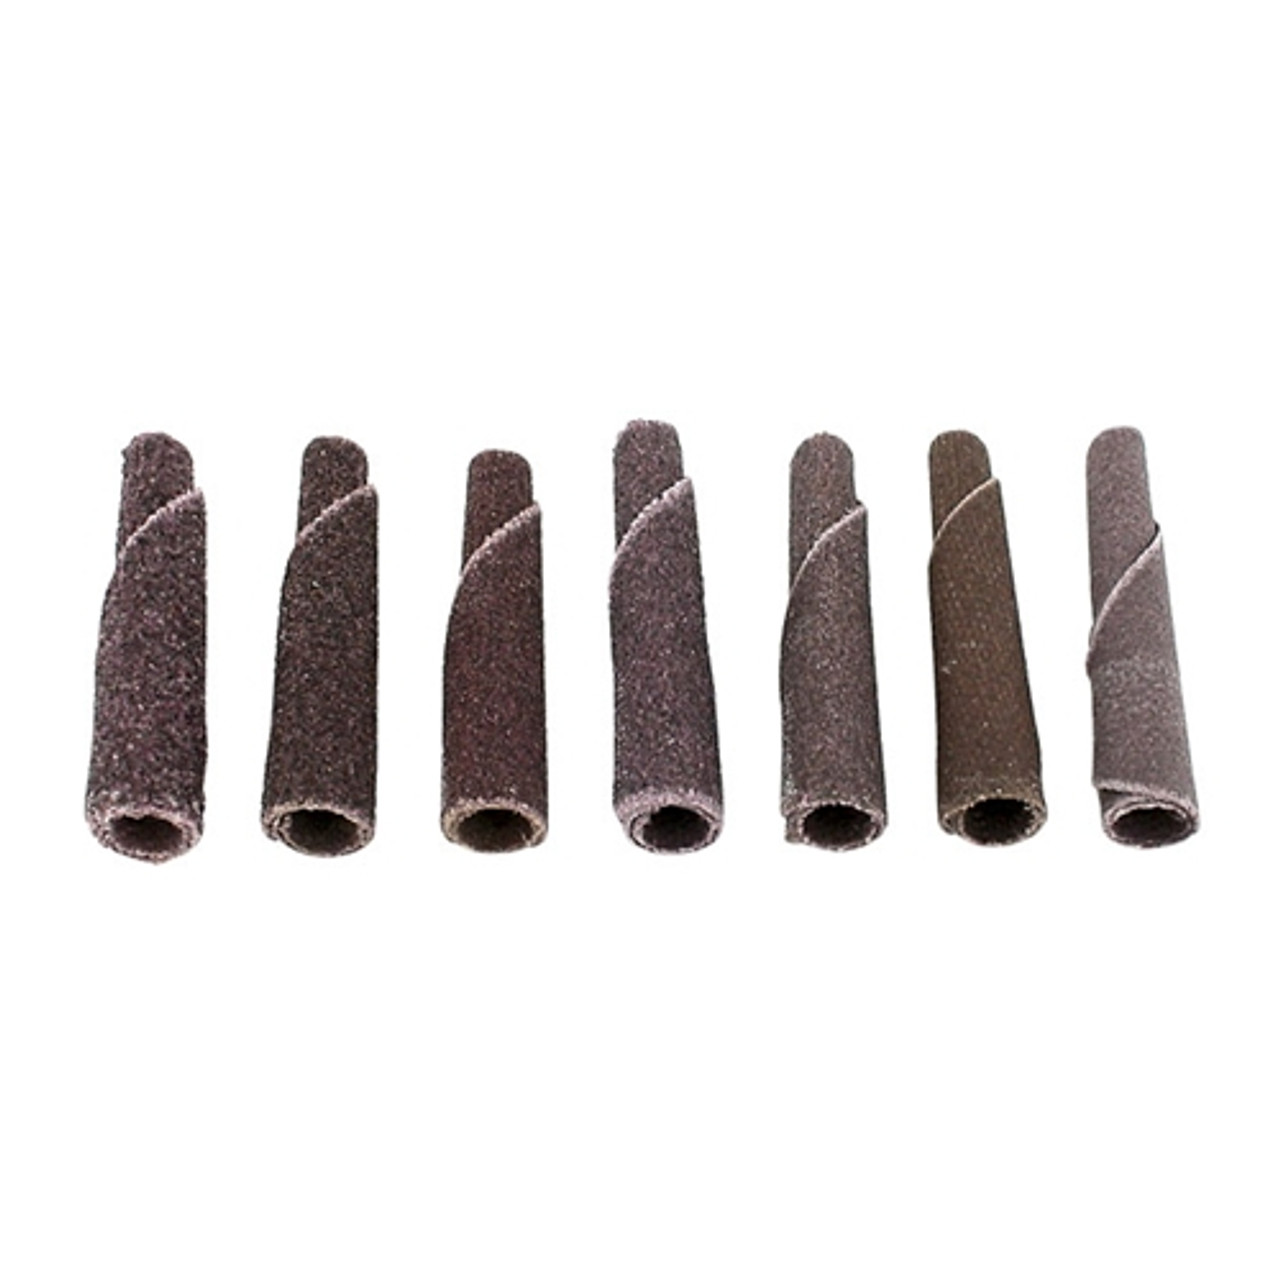 1-1/2" Tapered Cone Points - B-2, 60 Grit